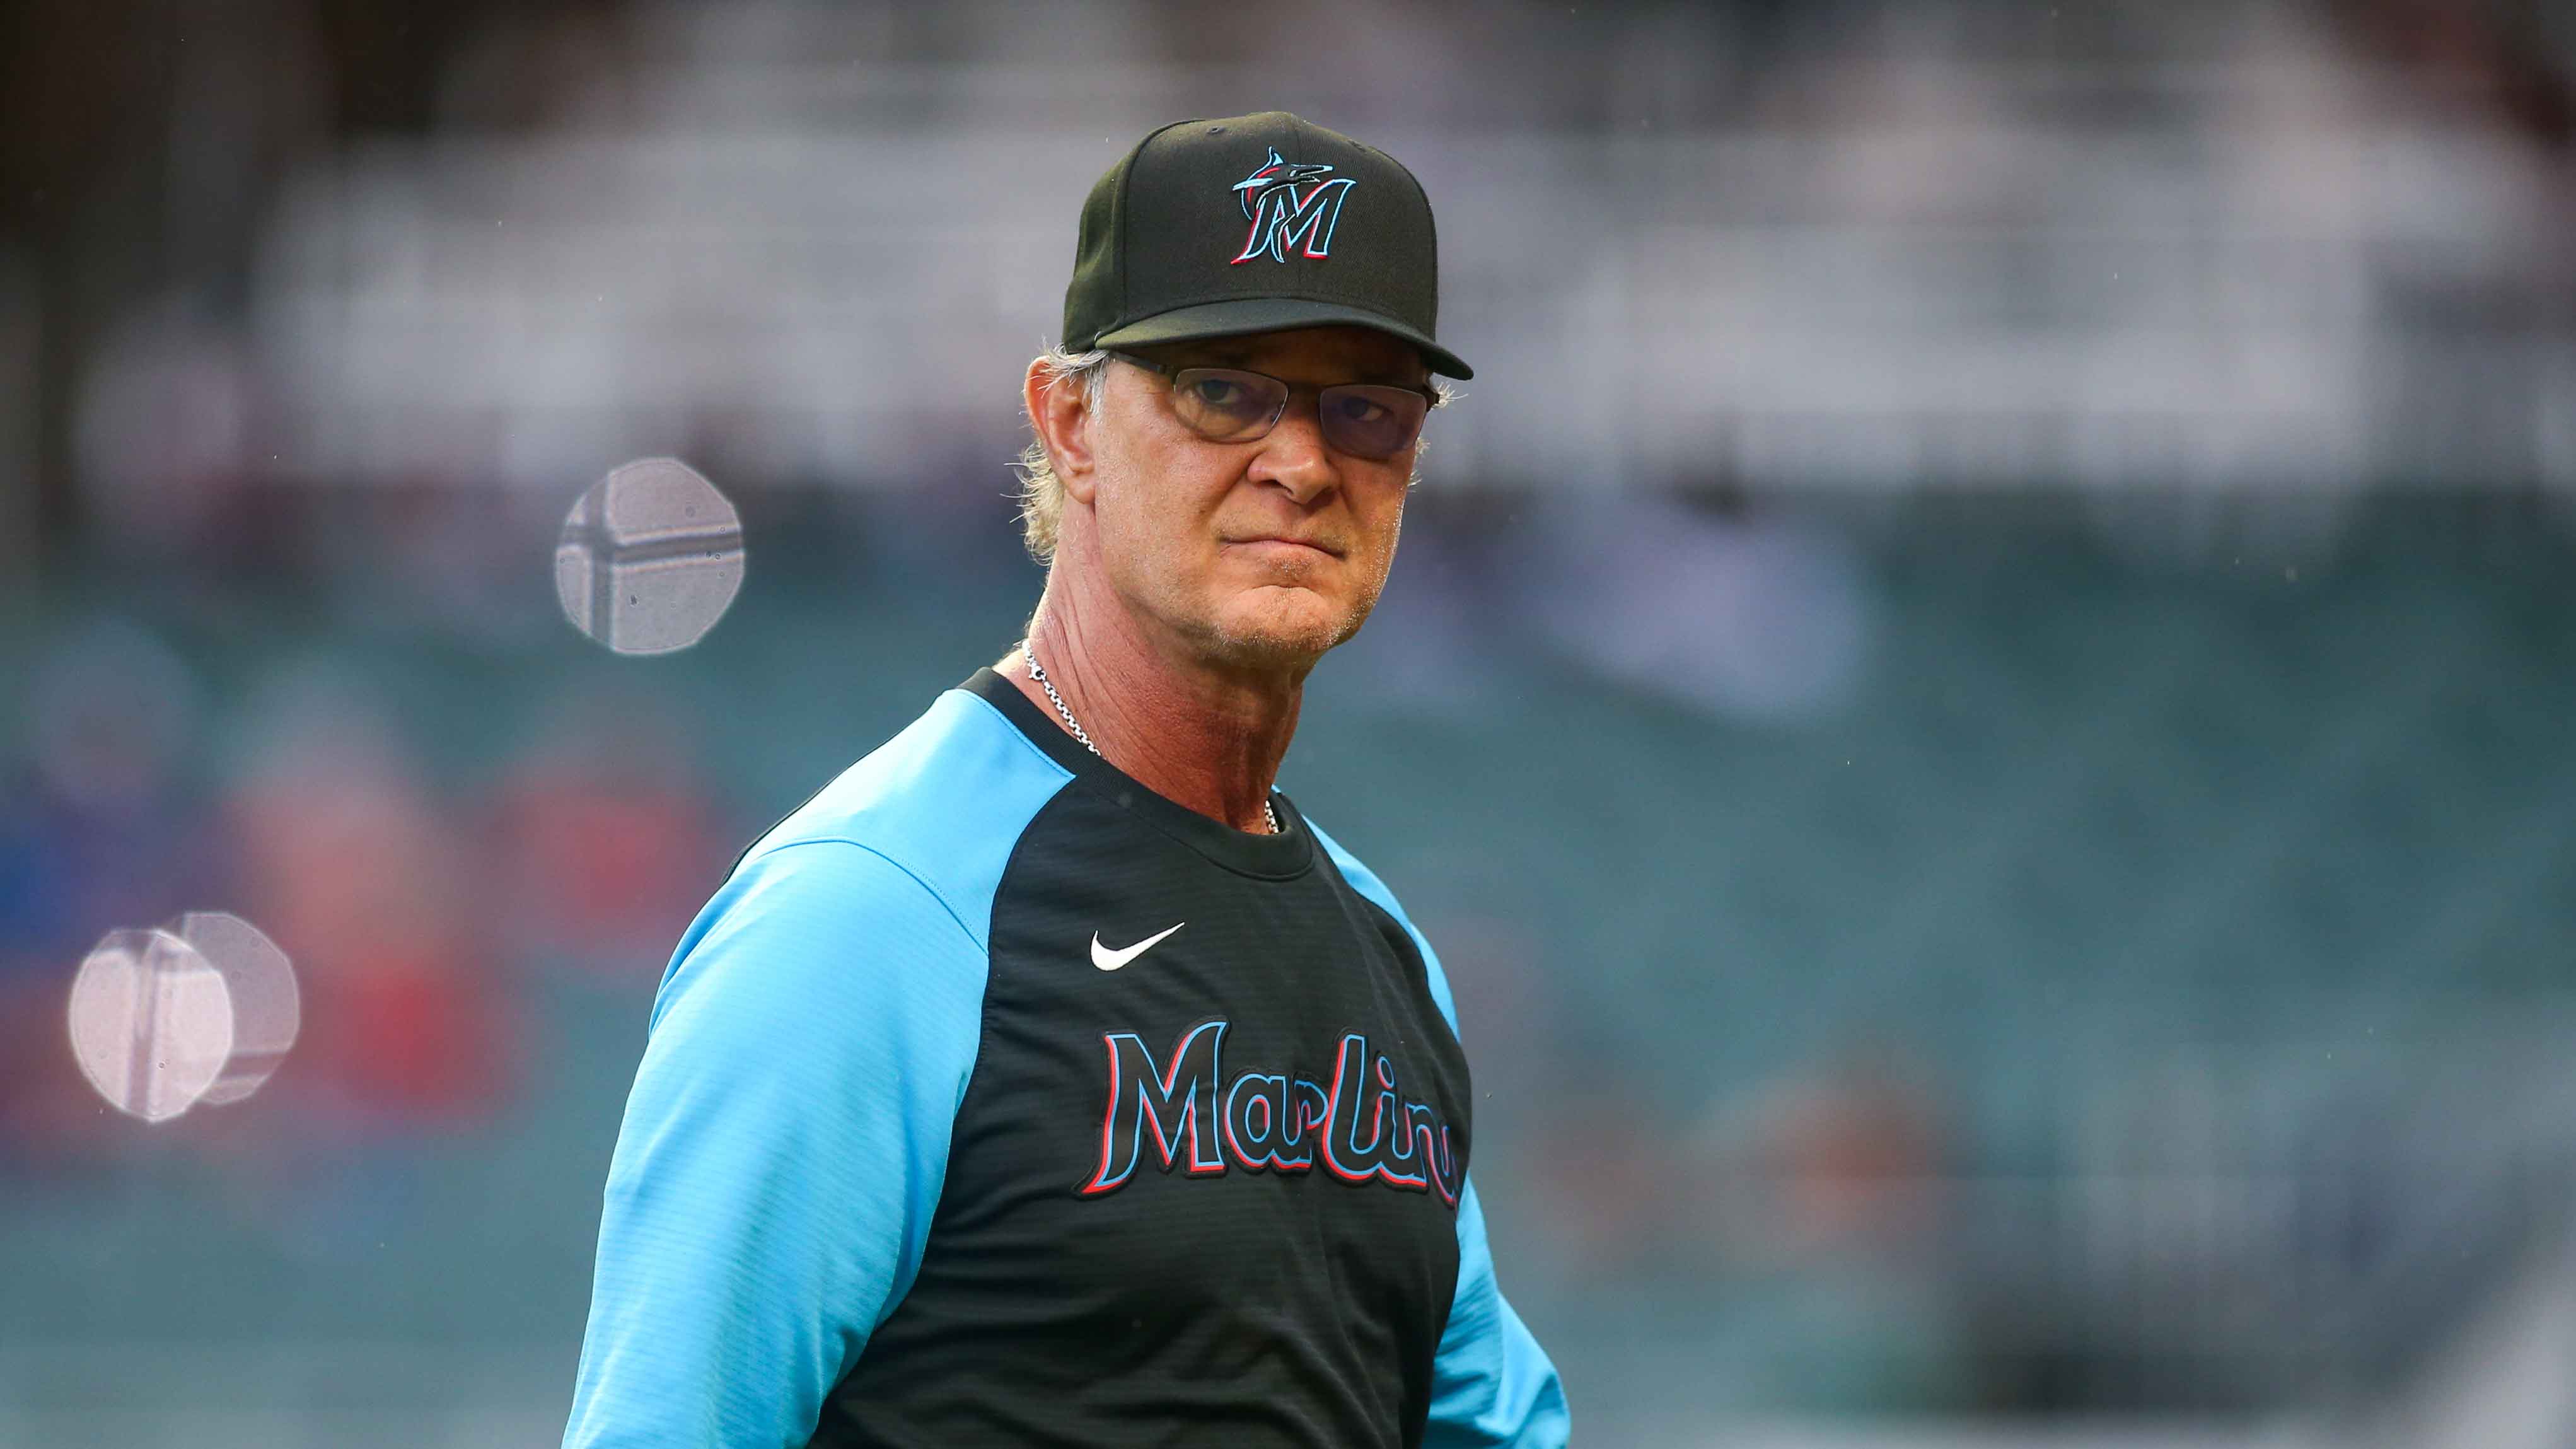 Don Mattingly aims to end Marlins' managerial merry-go-round